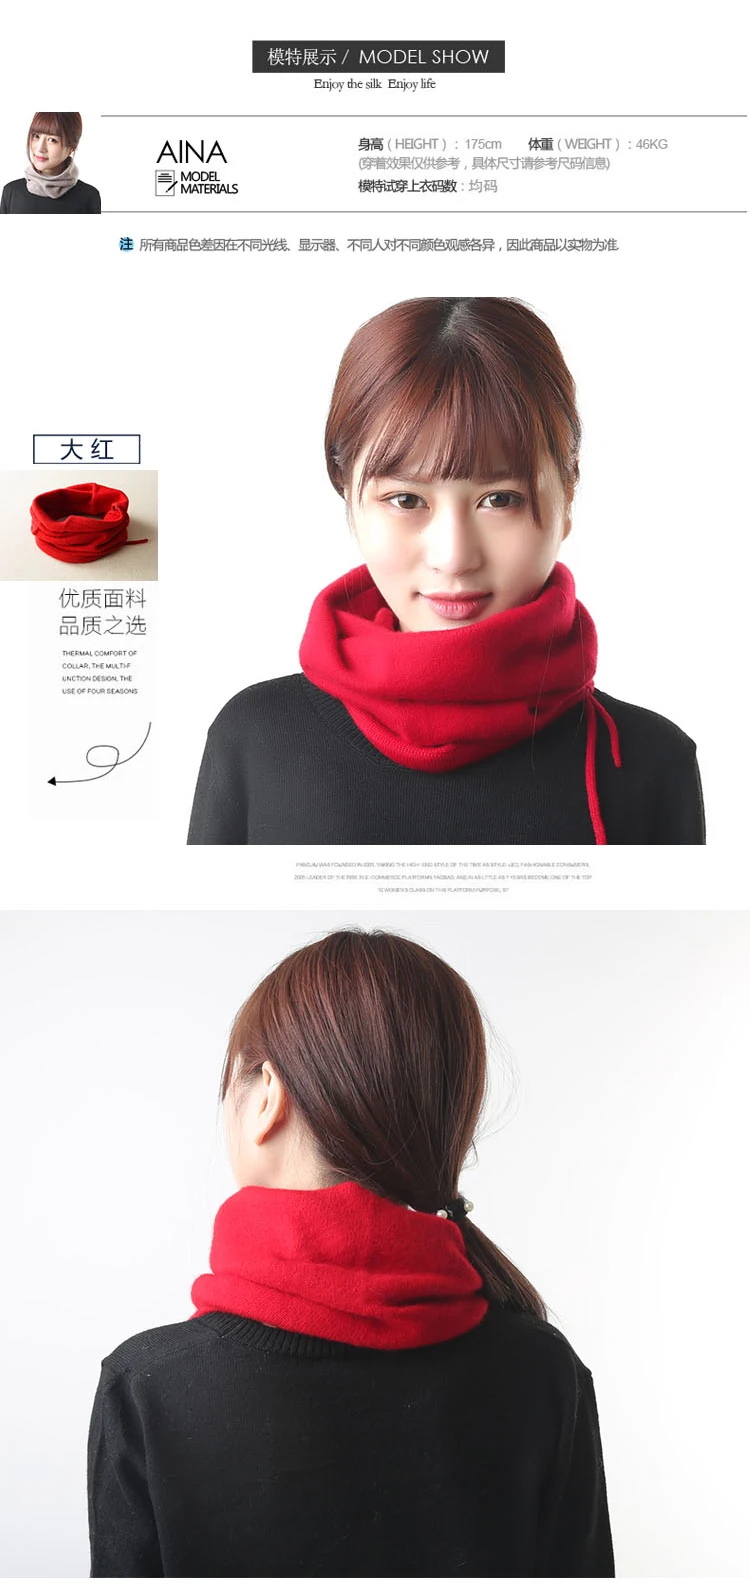 YUNSHUCLOSET women New pattern Cashmere scarf Neck hats 8 kinds of color Higt quality free shipping